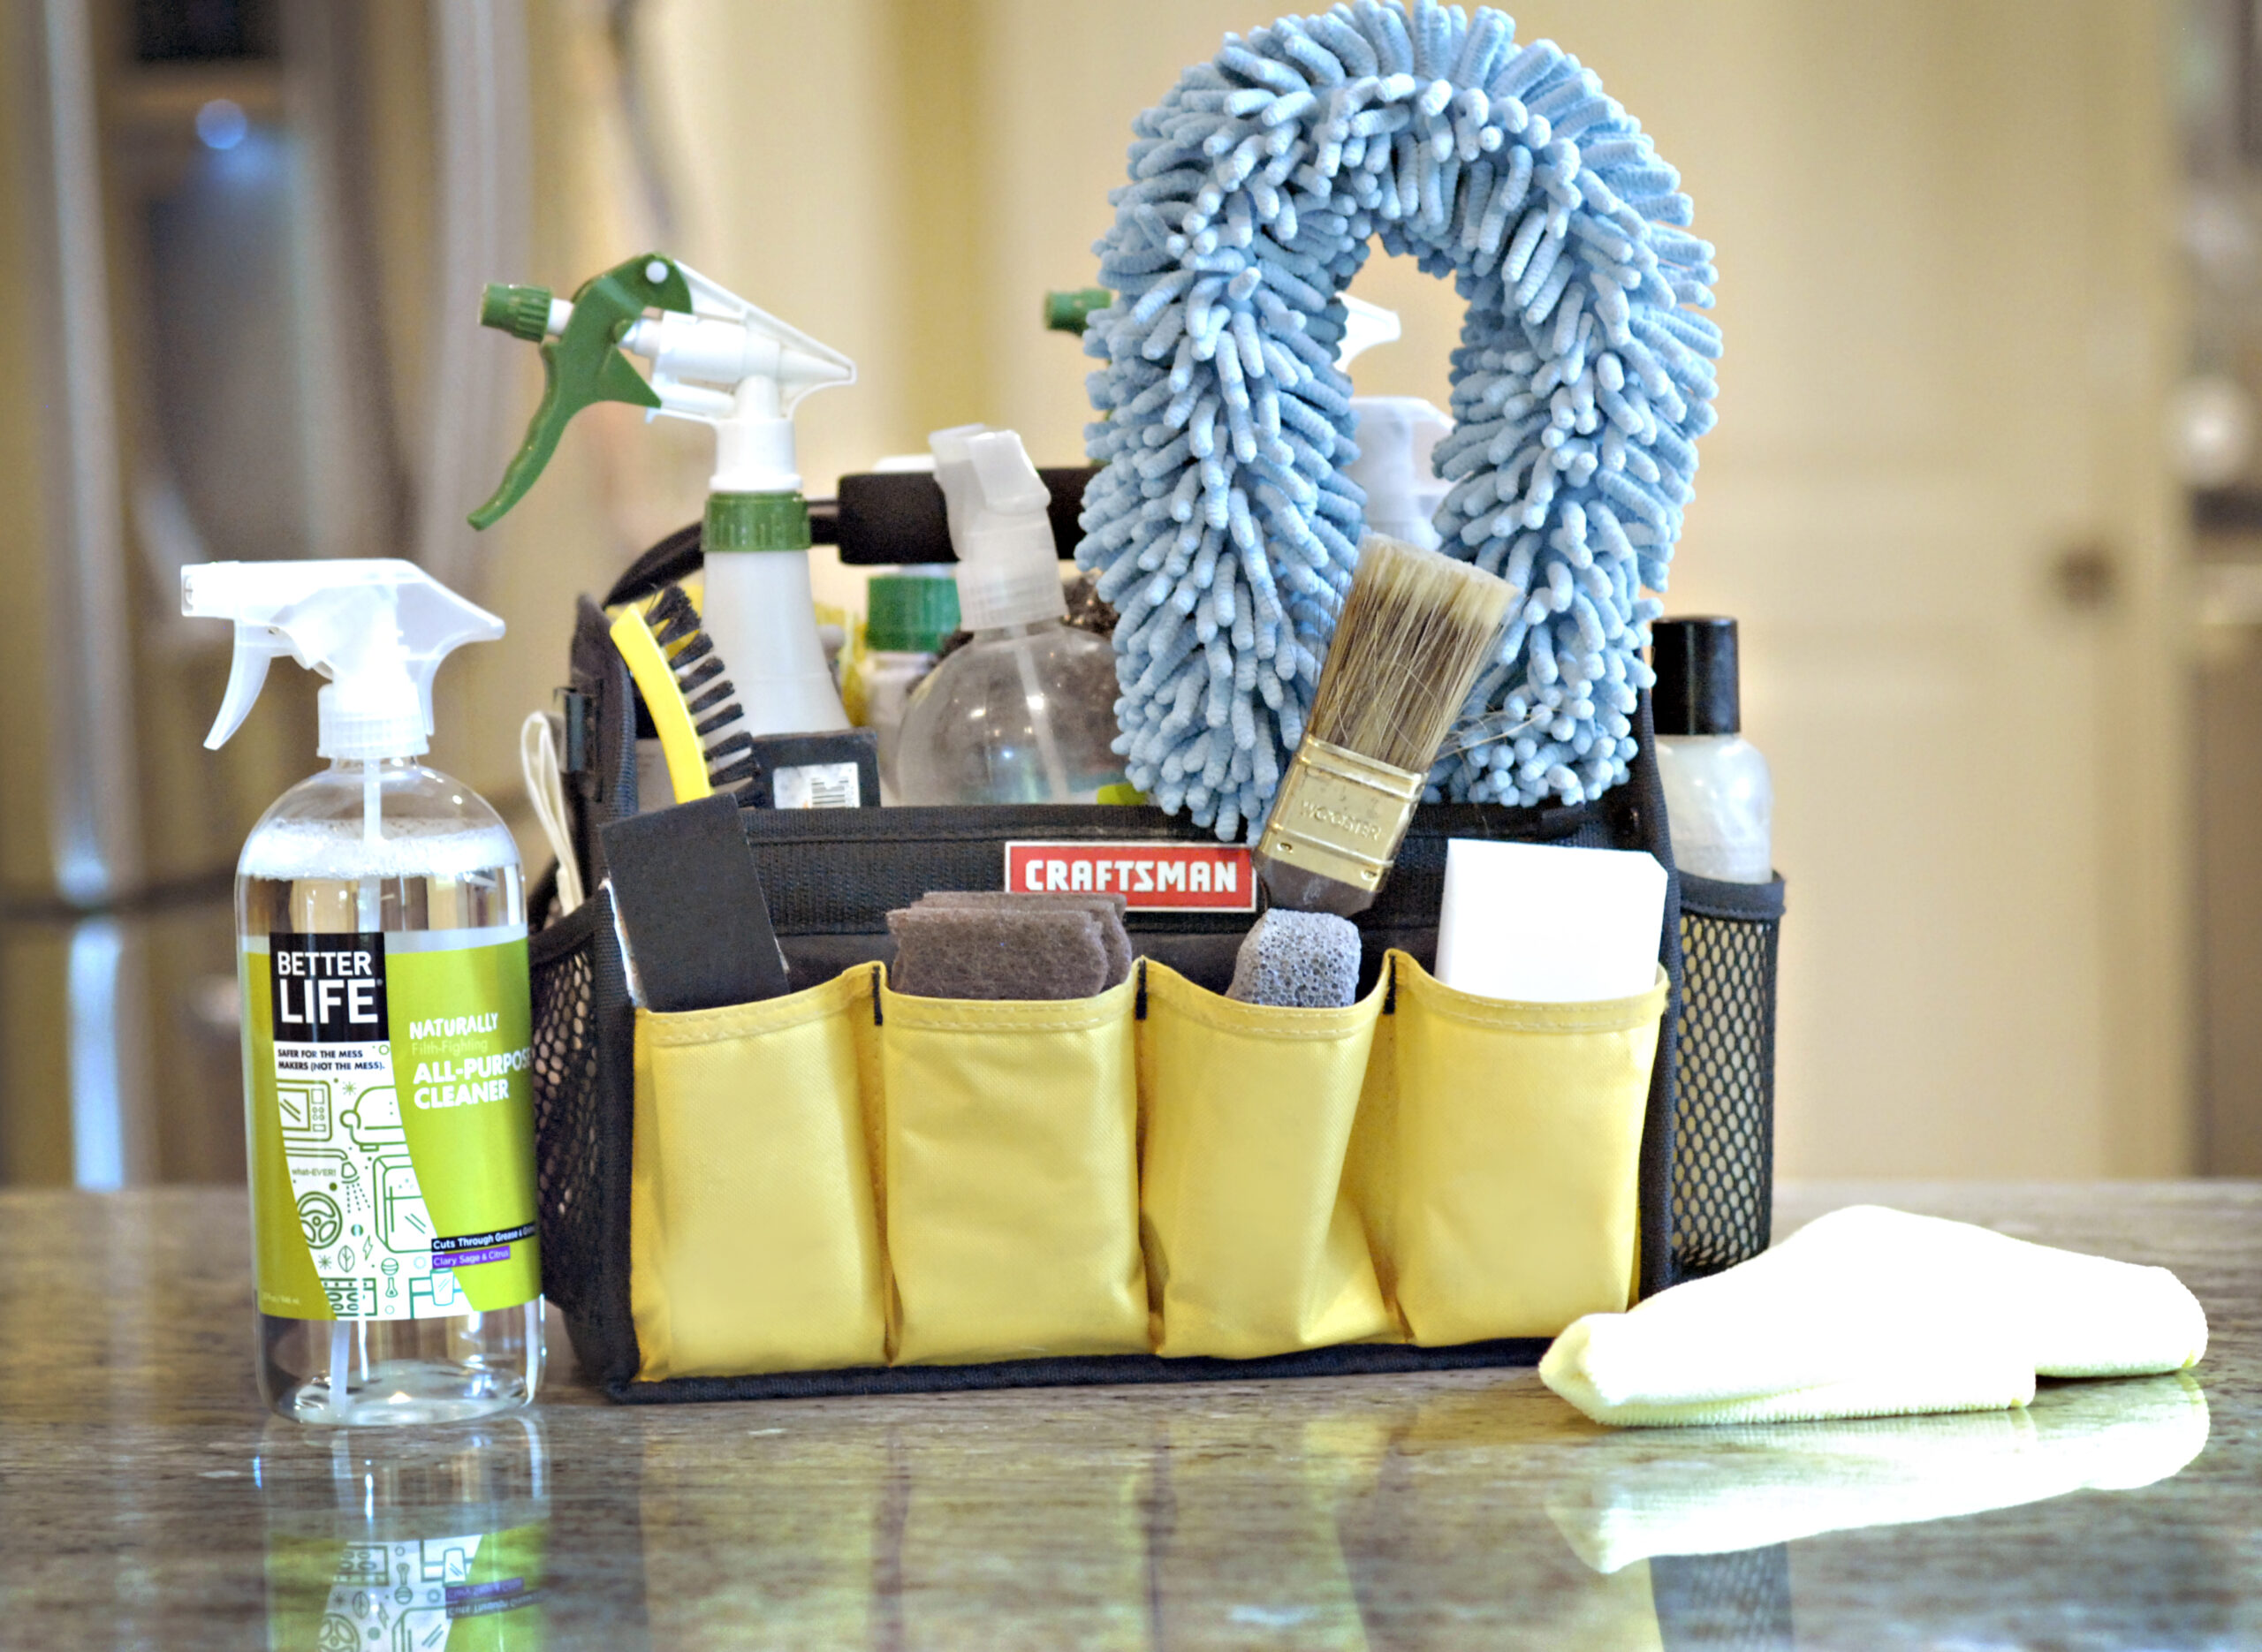 Naturalcare eco friendly cleaning products in a basket on a counter.